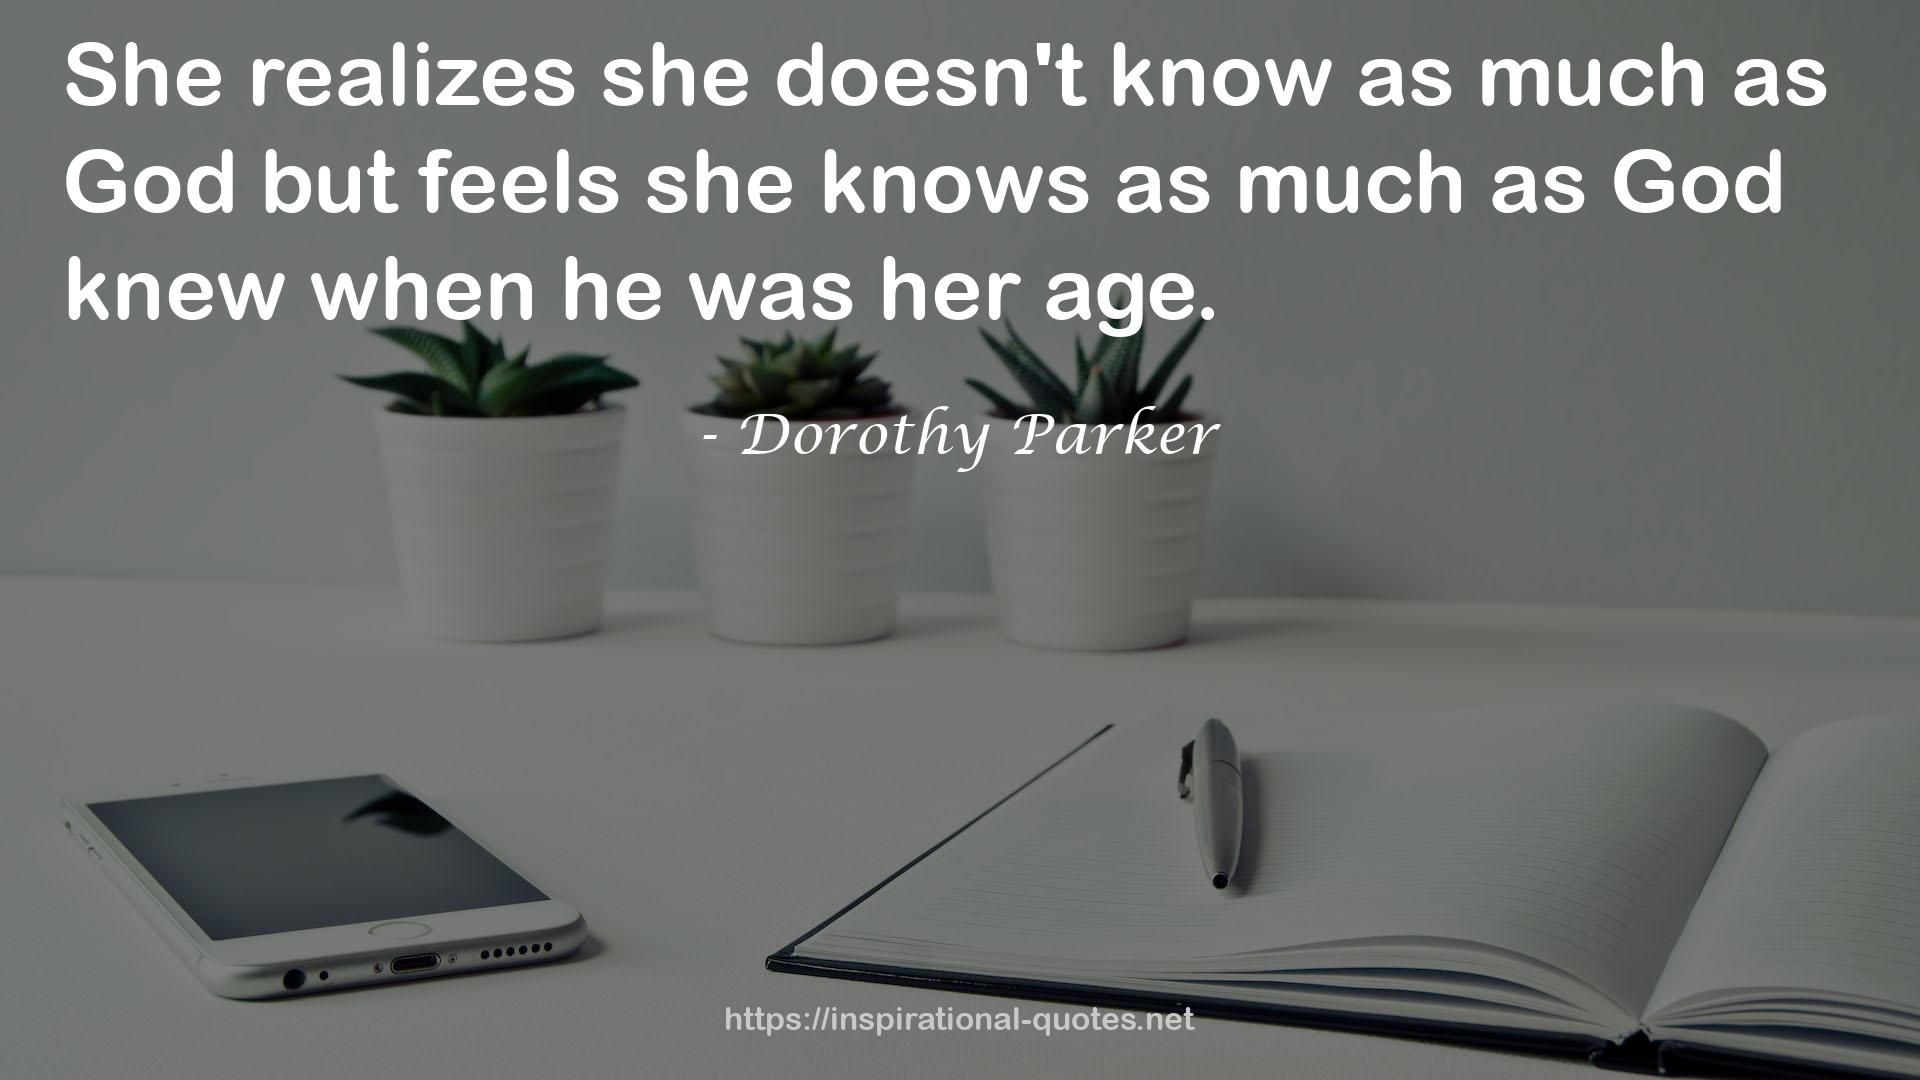 Dorothy Parker QUOTES